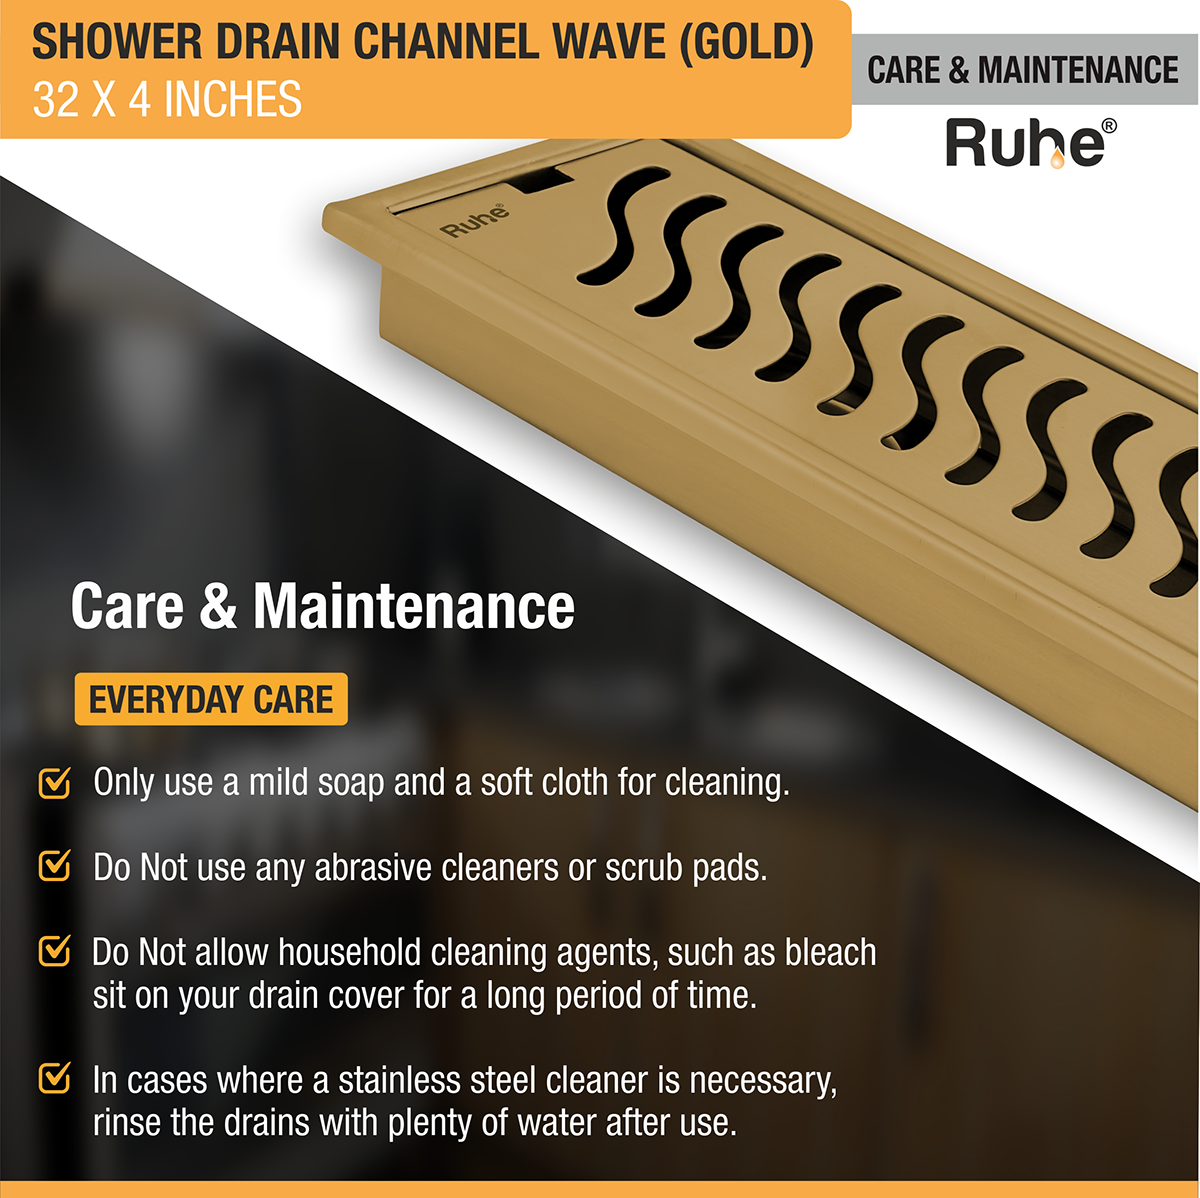 Wave Shower Drain Channel (32 x 4 Inches) YELLOW GOLD care and maintenance